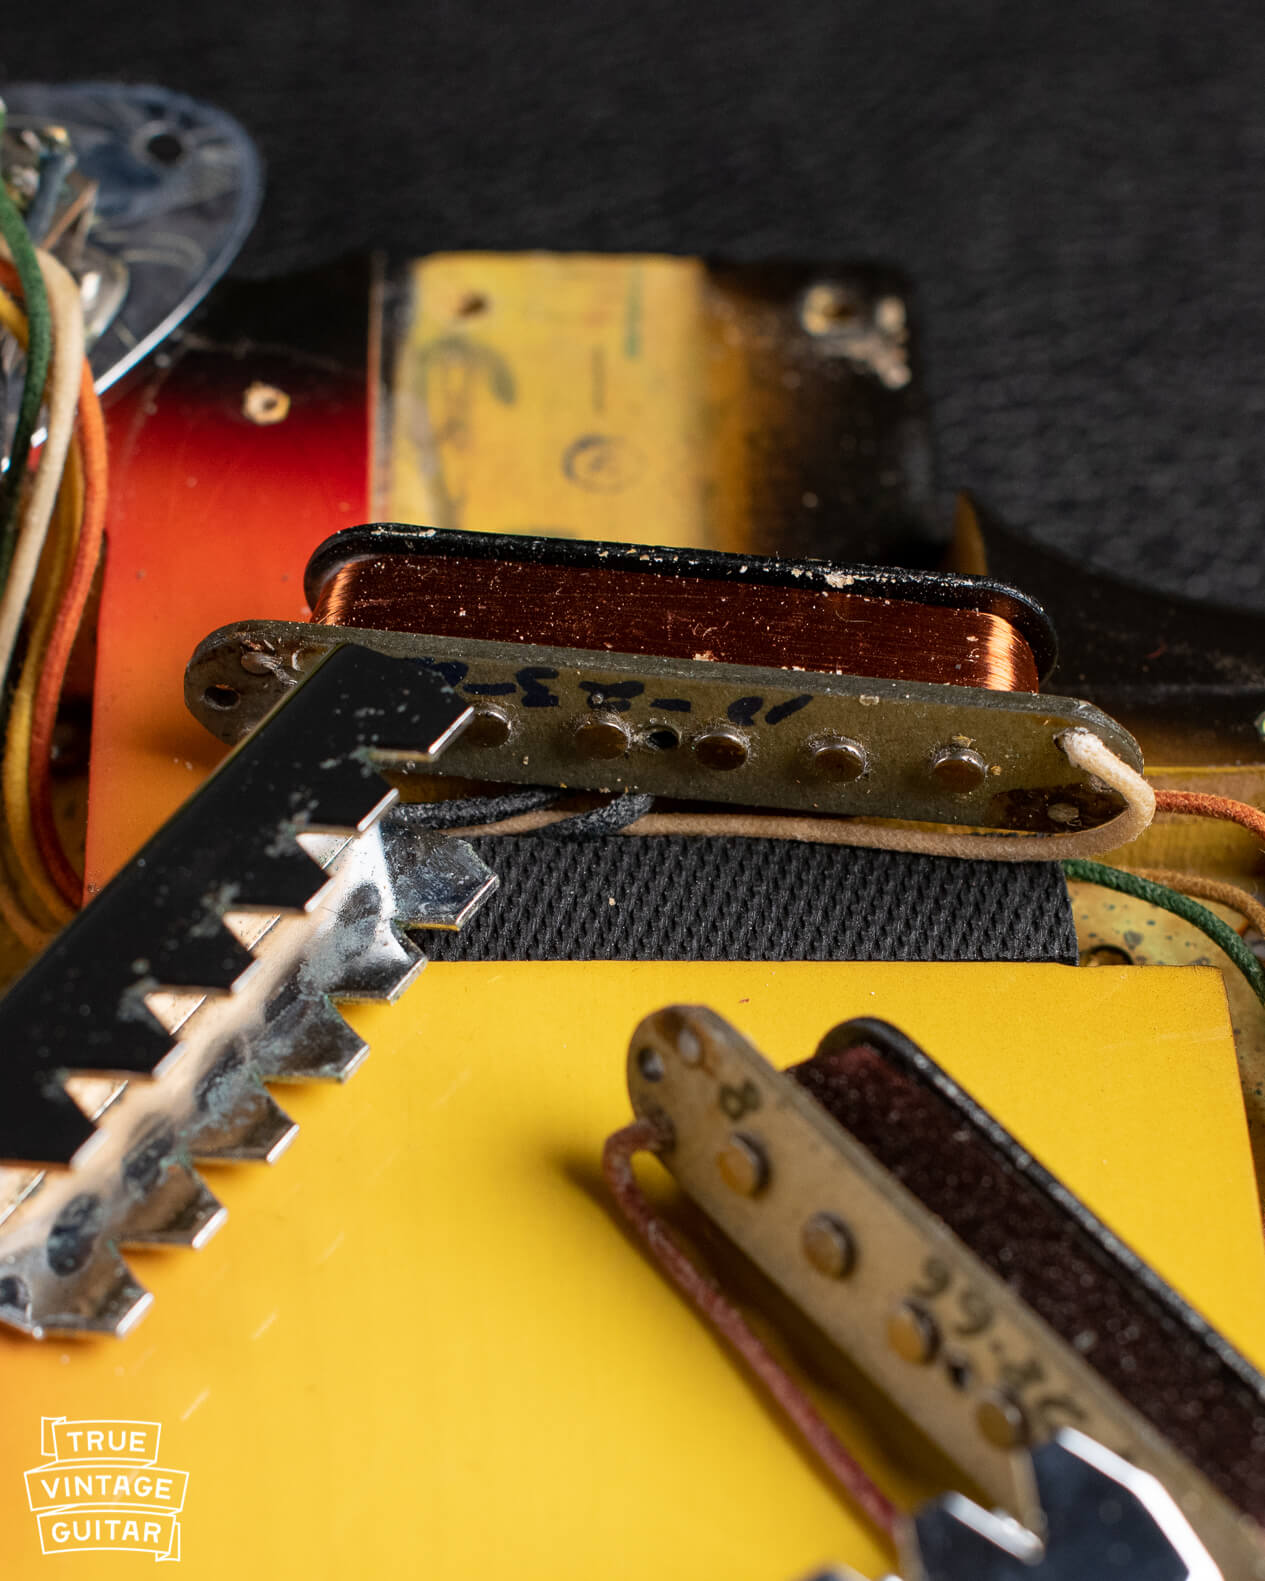 How to date Fender Jaguar pickups with date signature